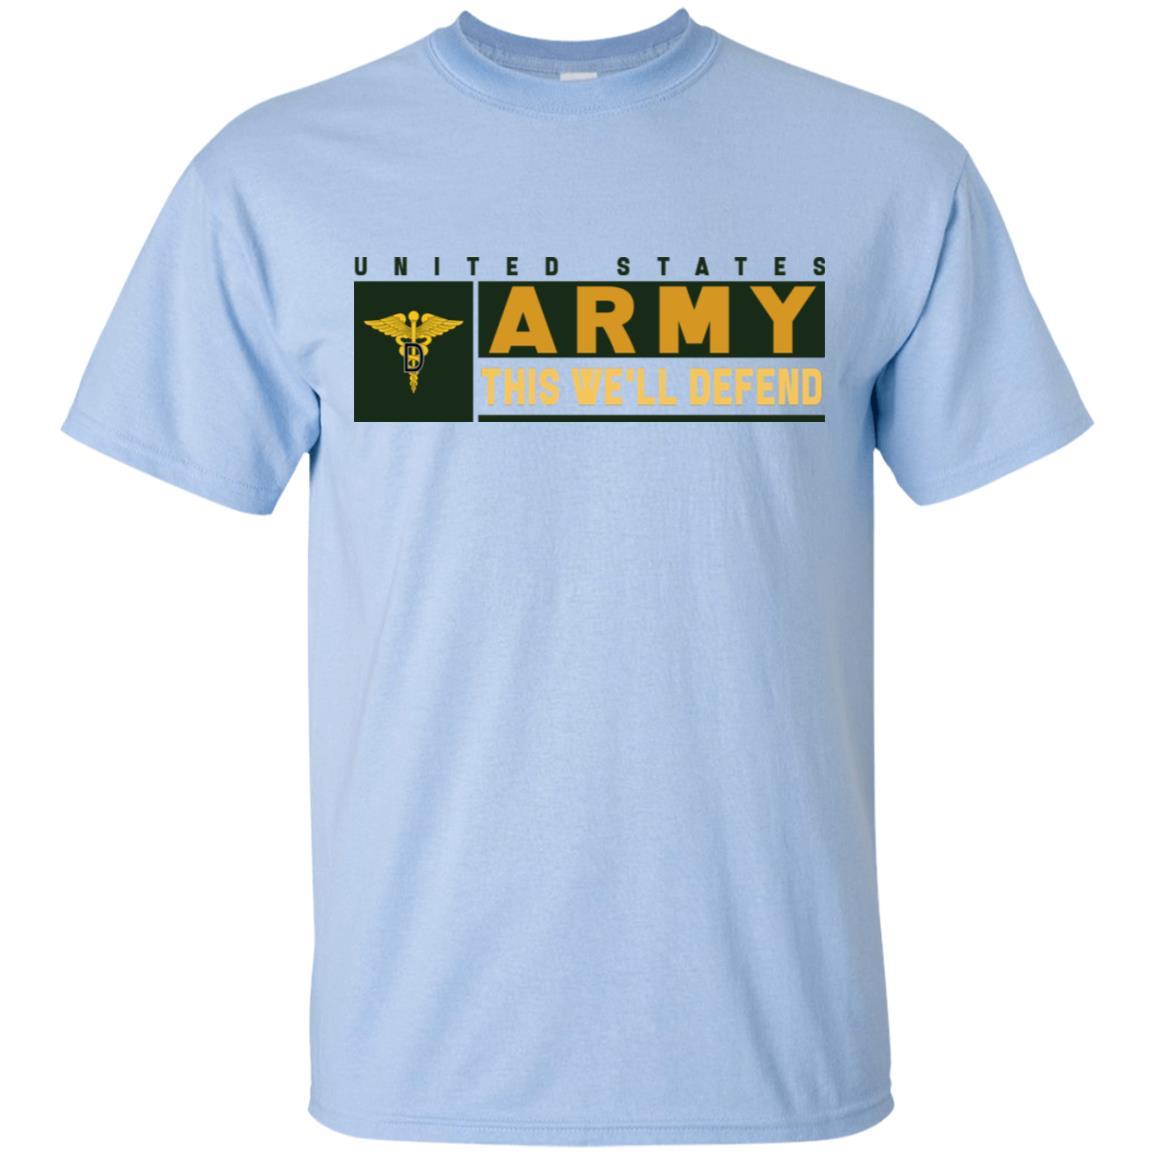 U.S. Army Dental Corps- This We'll Defend T-Shirt On Front For Men-TShirt-Army-Veterans Nation